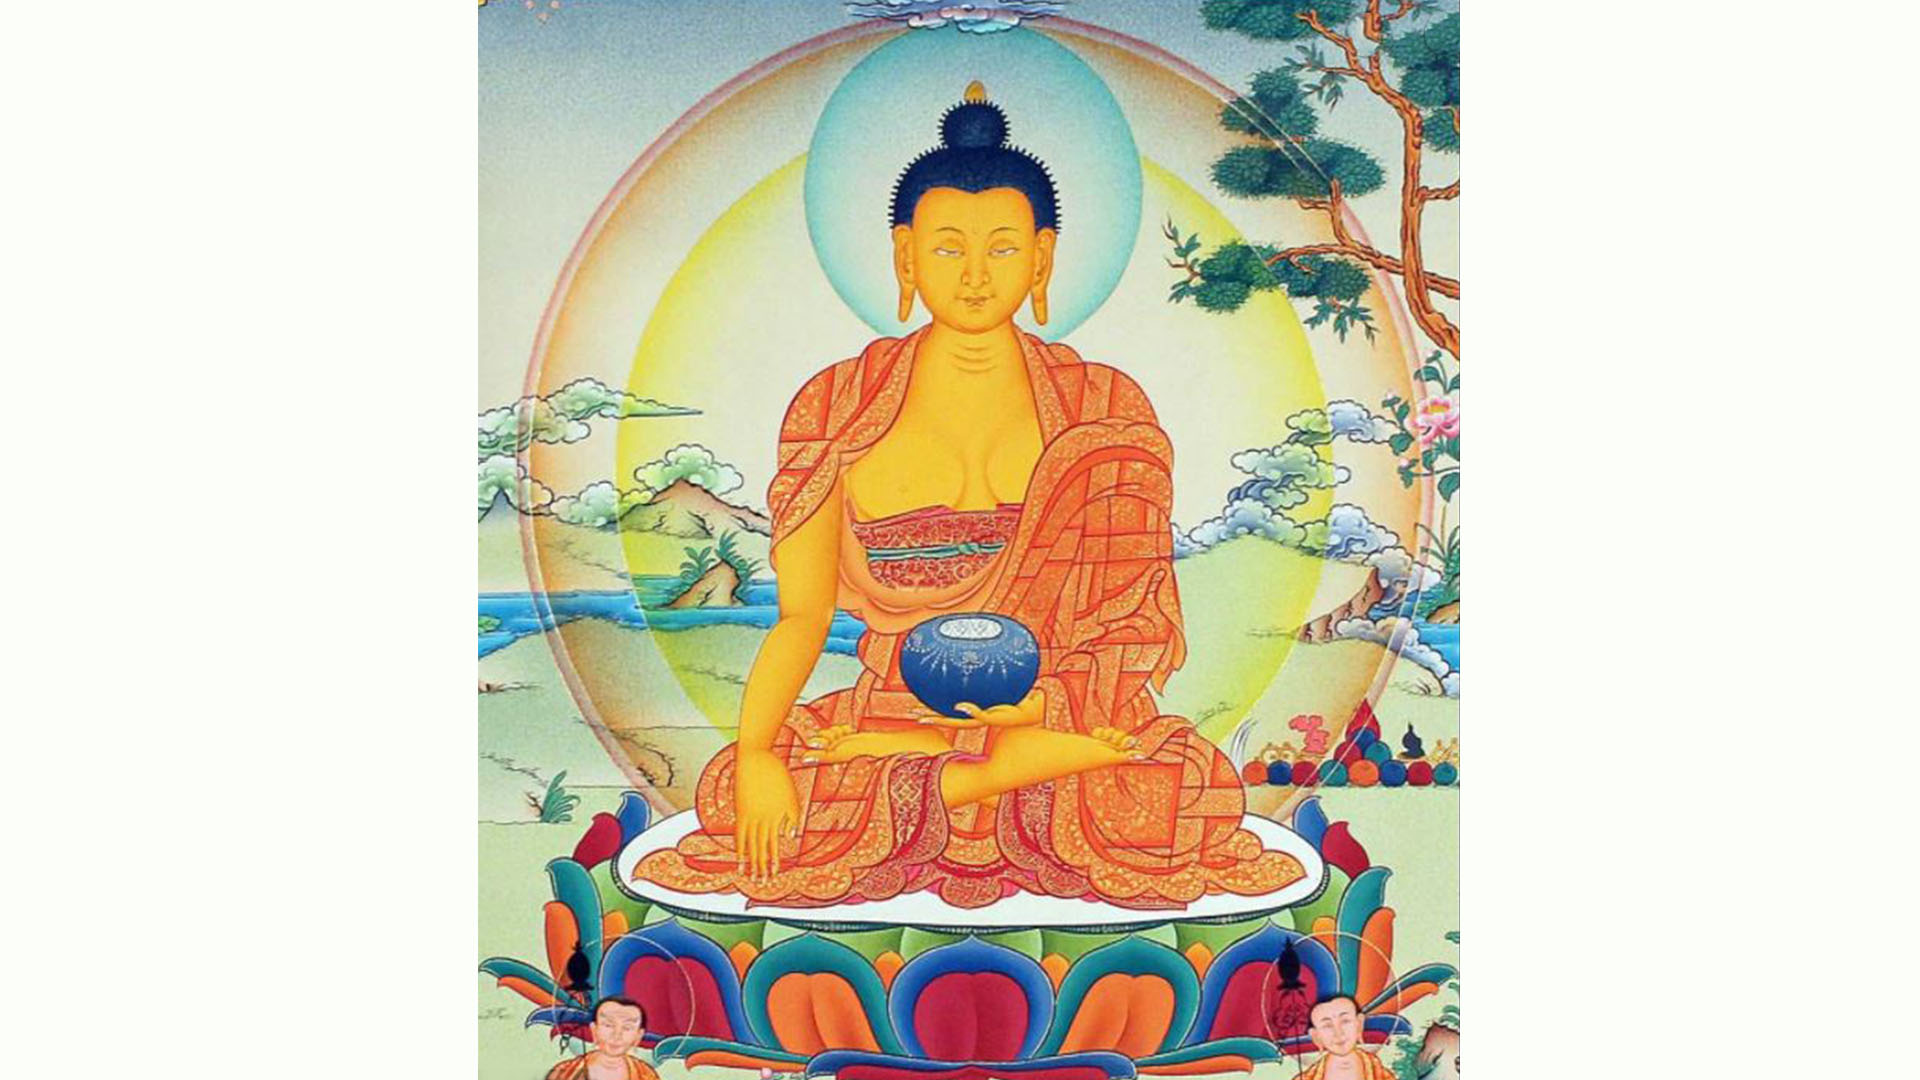 Request to participate in the goal of chanting 100 million mantras under Shakyamuni